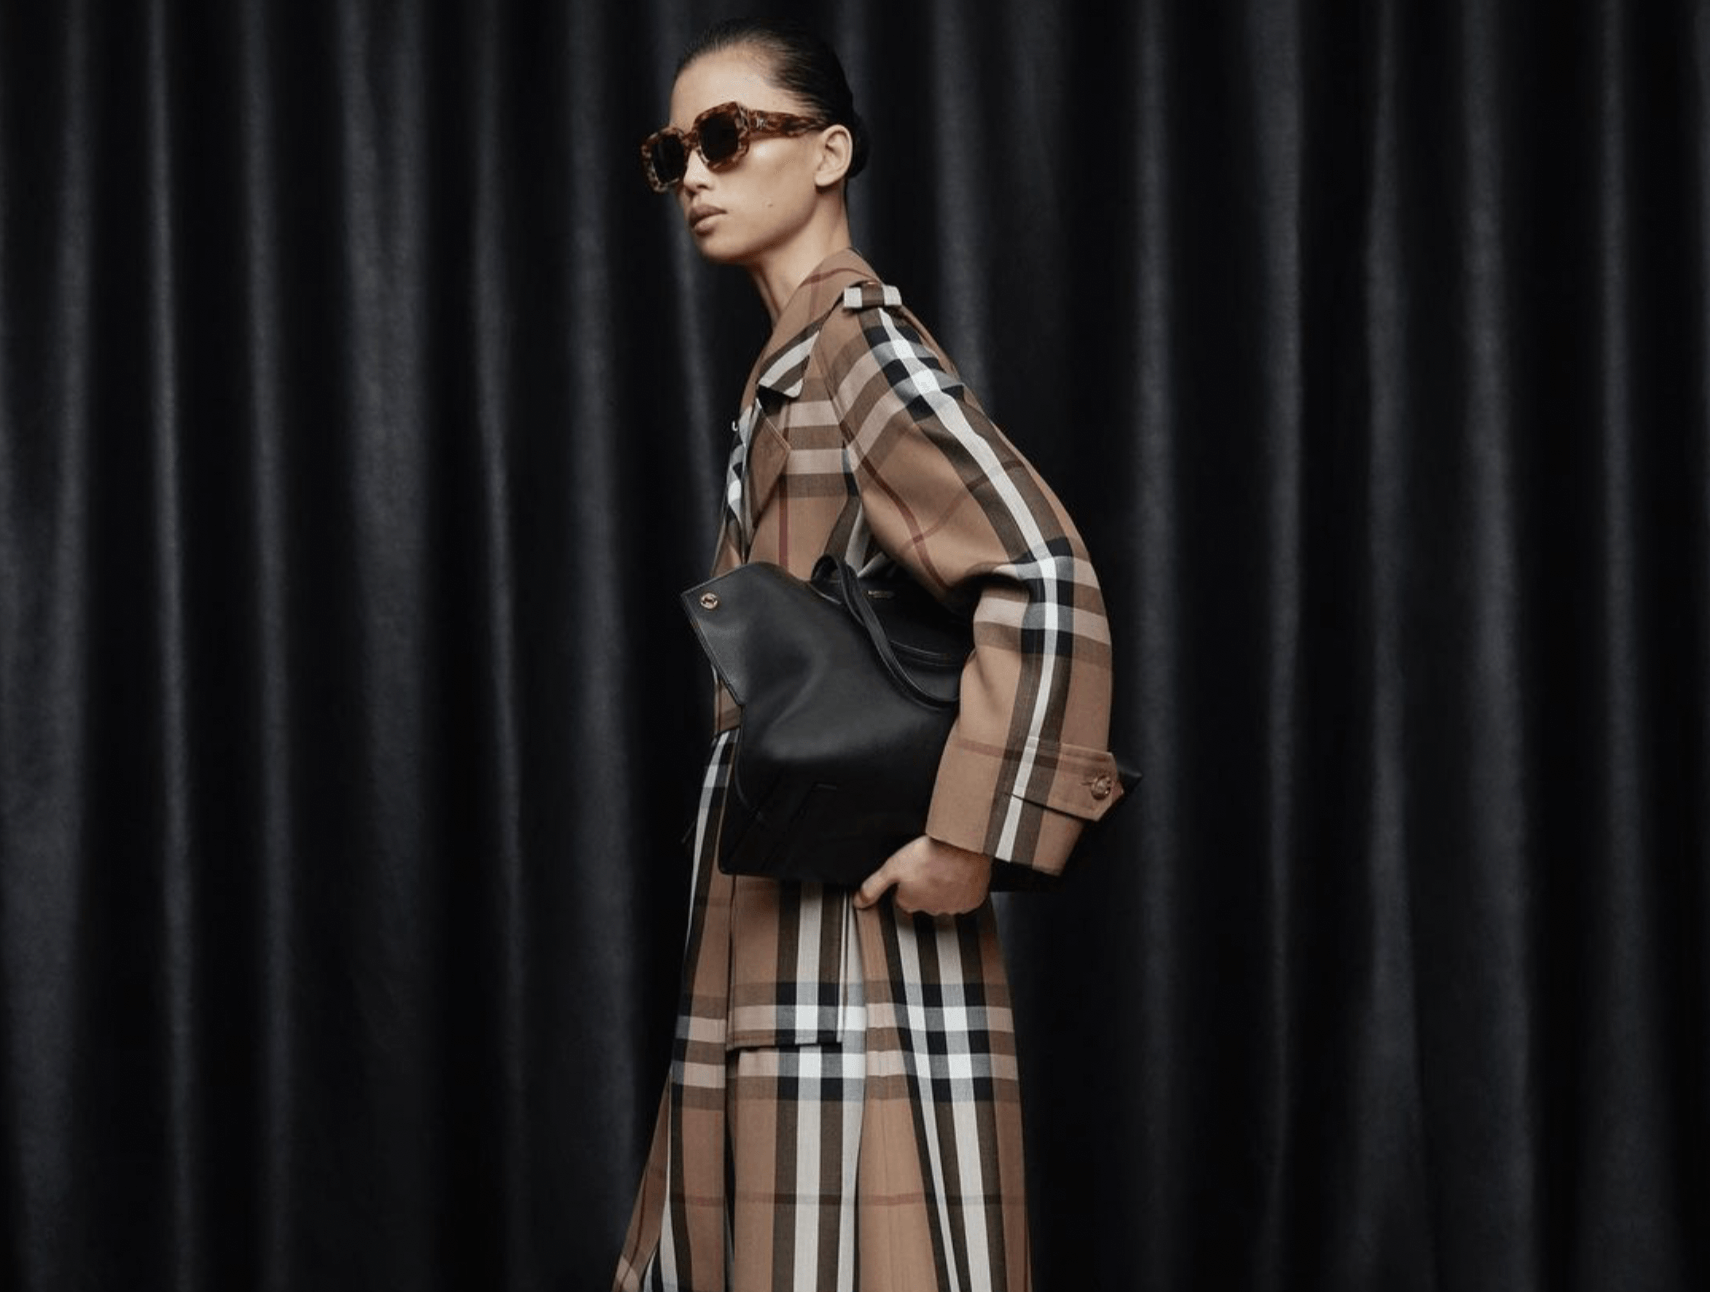 Burberry Sales are Up in 2021, as the Brand Continues Quest to Cement